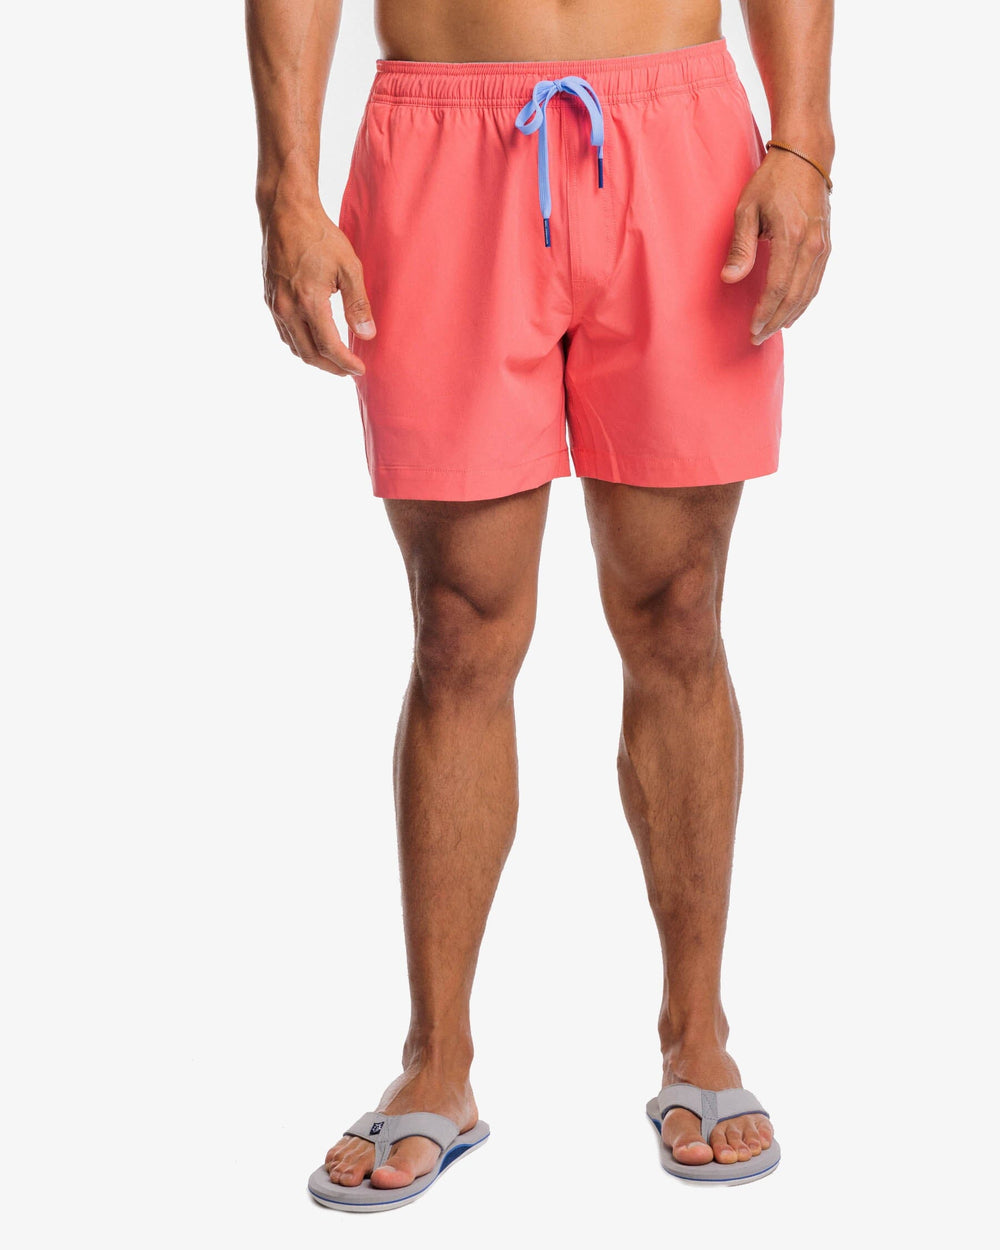 The front view of the Southern Tide Solid Swim Trunk 3 by Southern Tide - Sunkist Coral